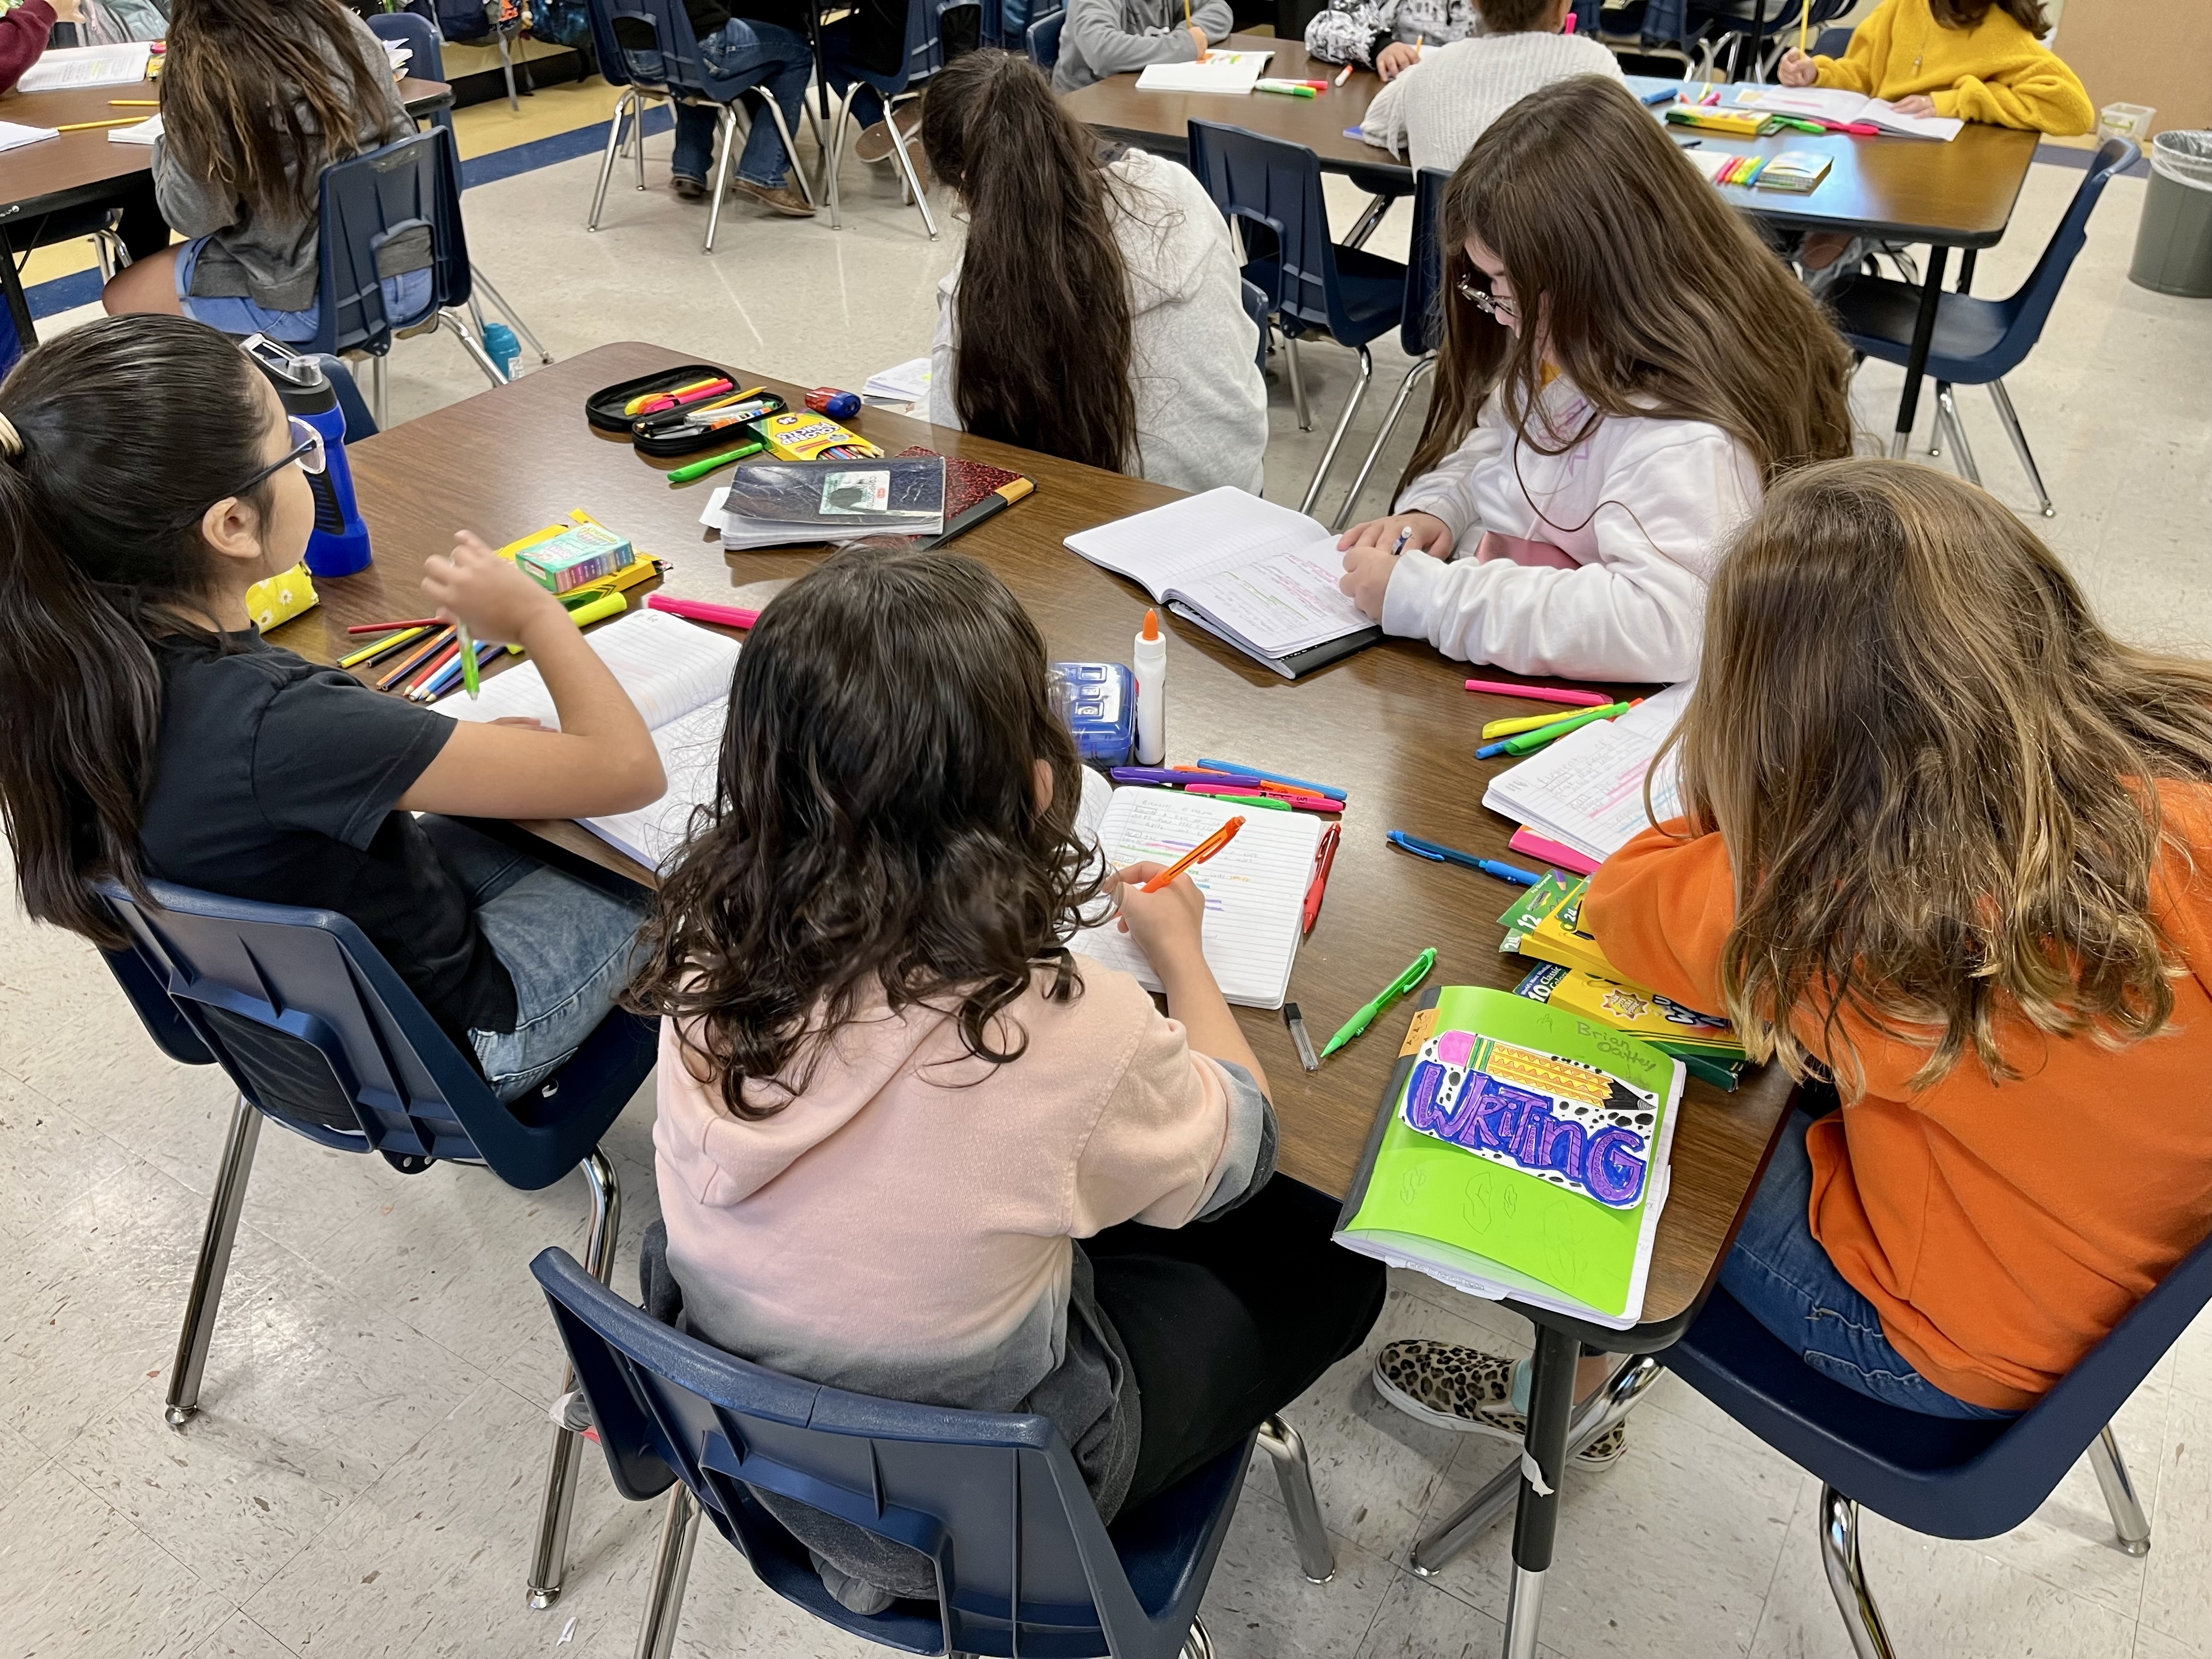 Students writing in their journals